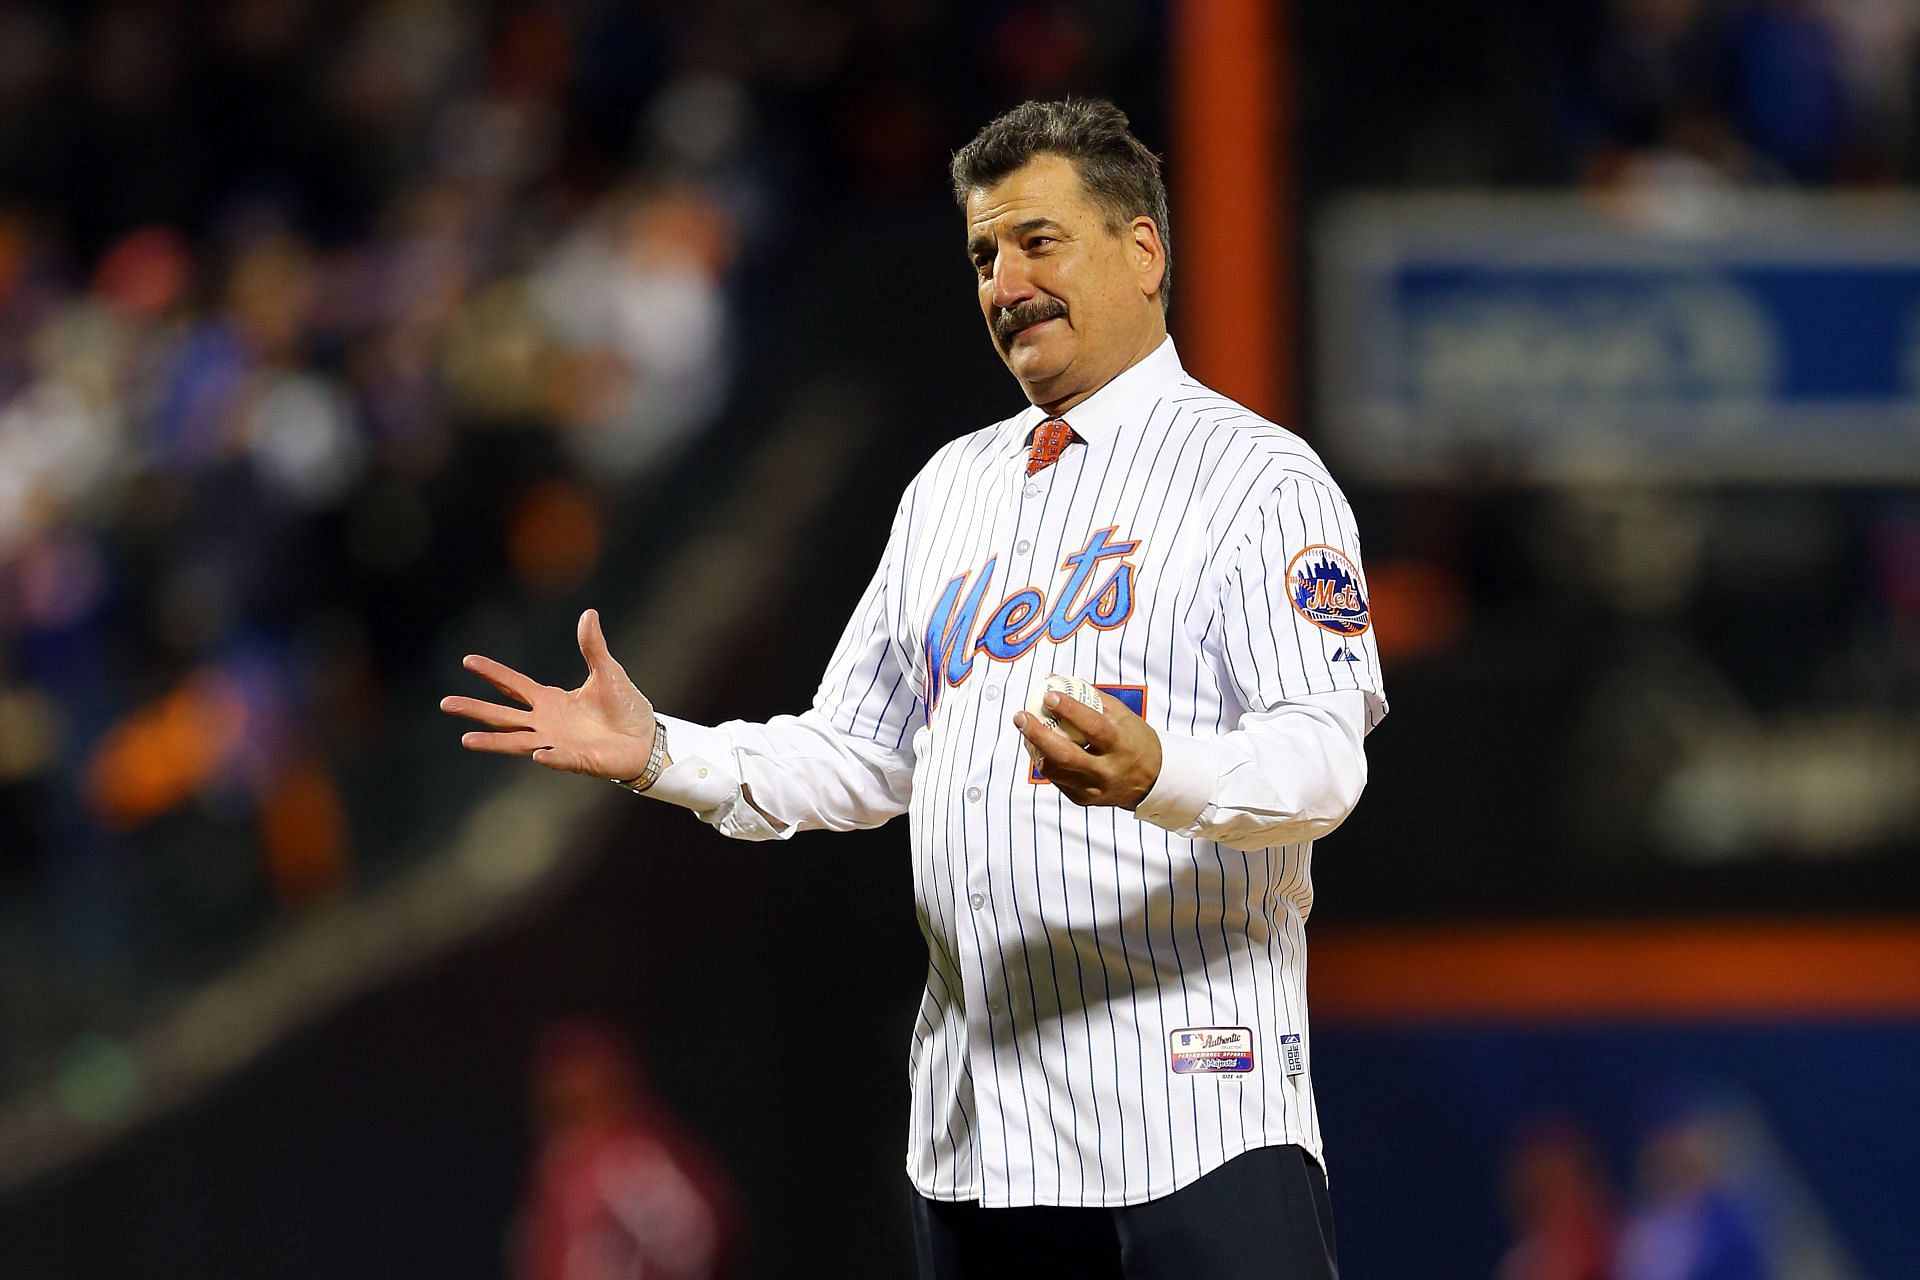 We finally have an encouraging Keith Hernandez, SNY contract update